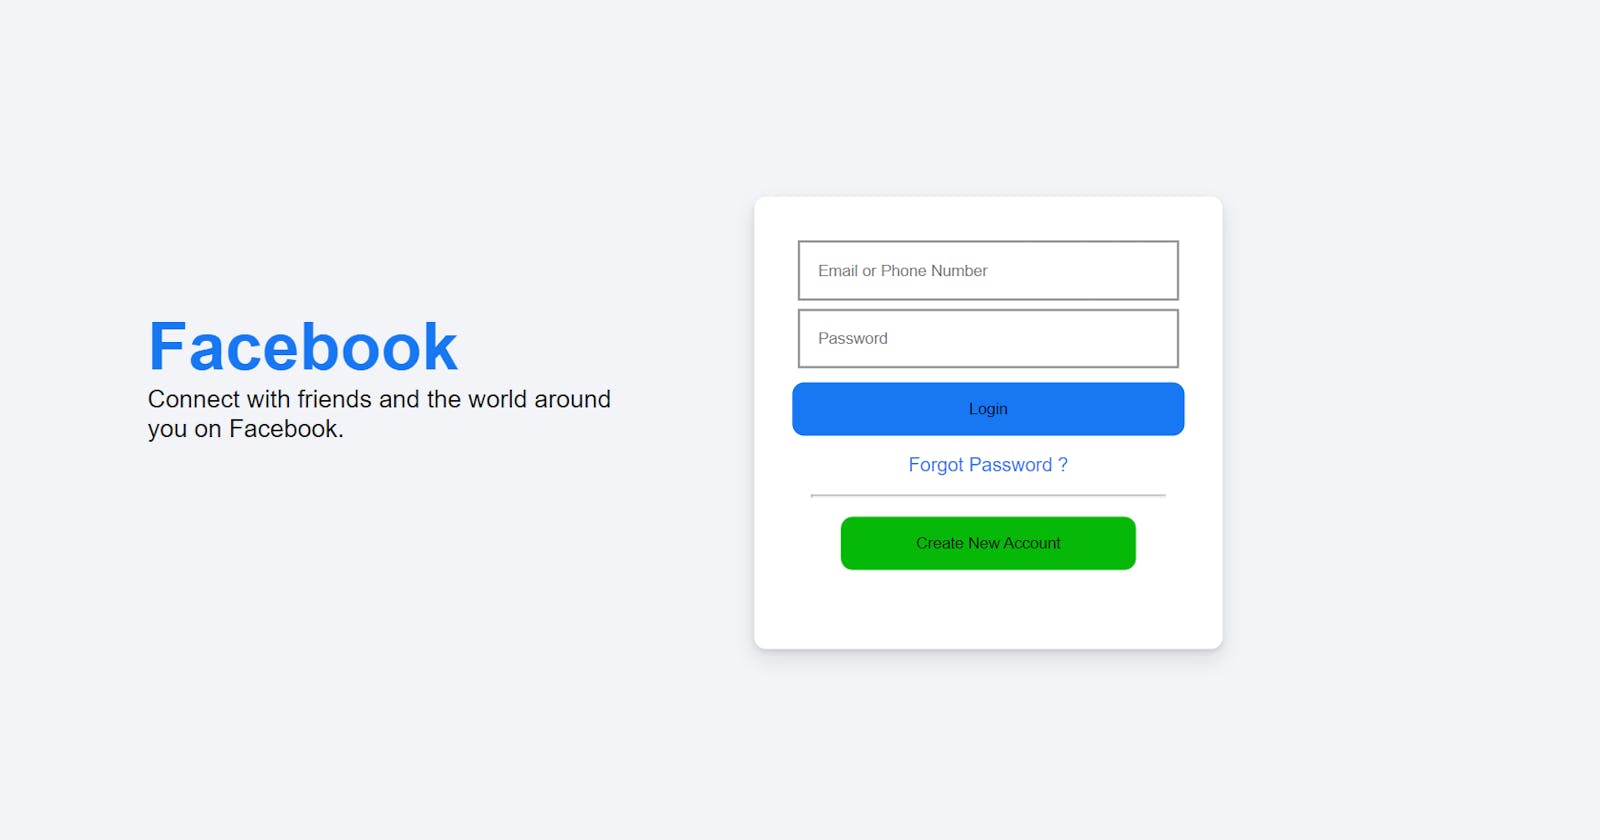 How to Build Facebook Login Page Using HTML and CSS